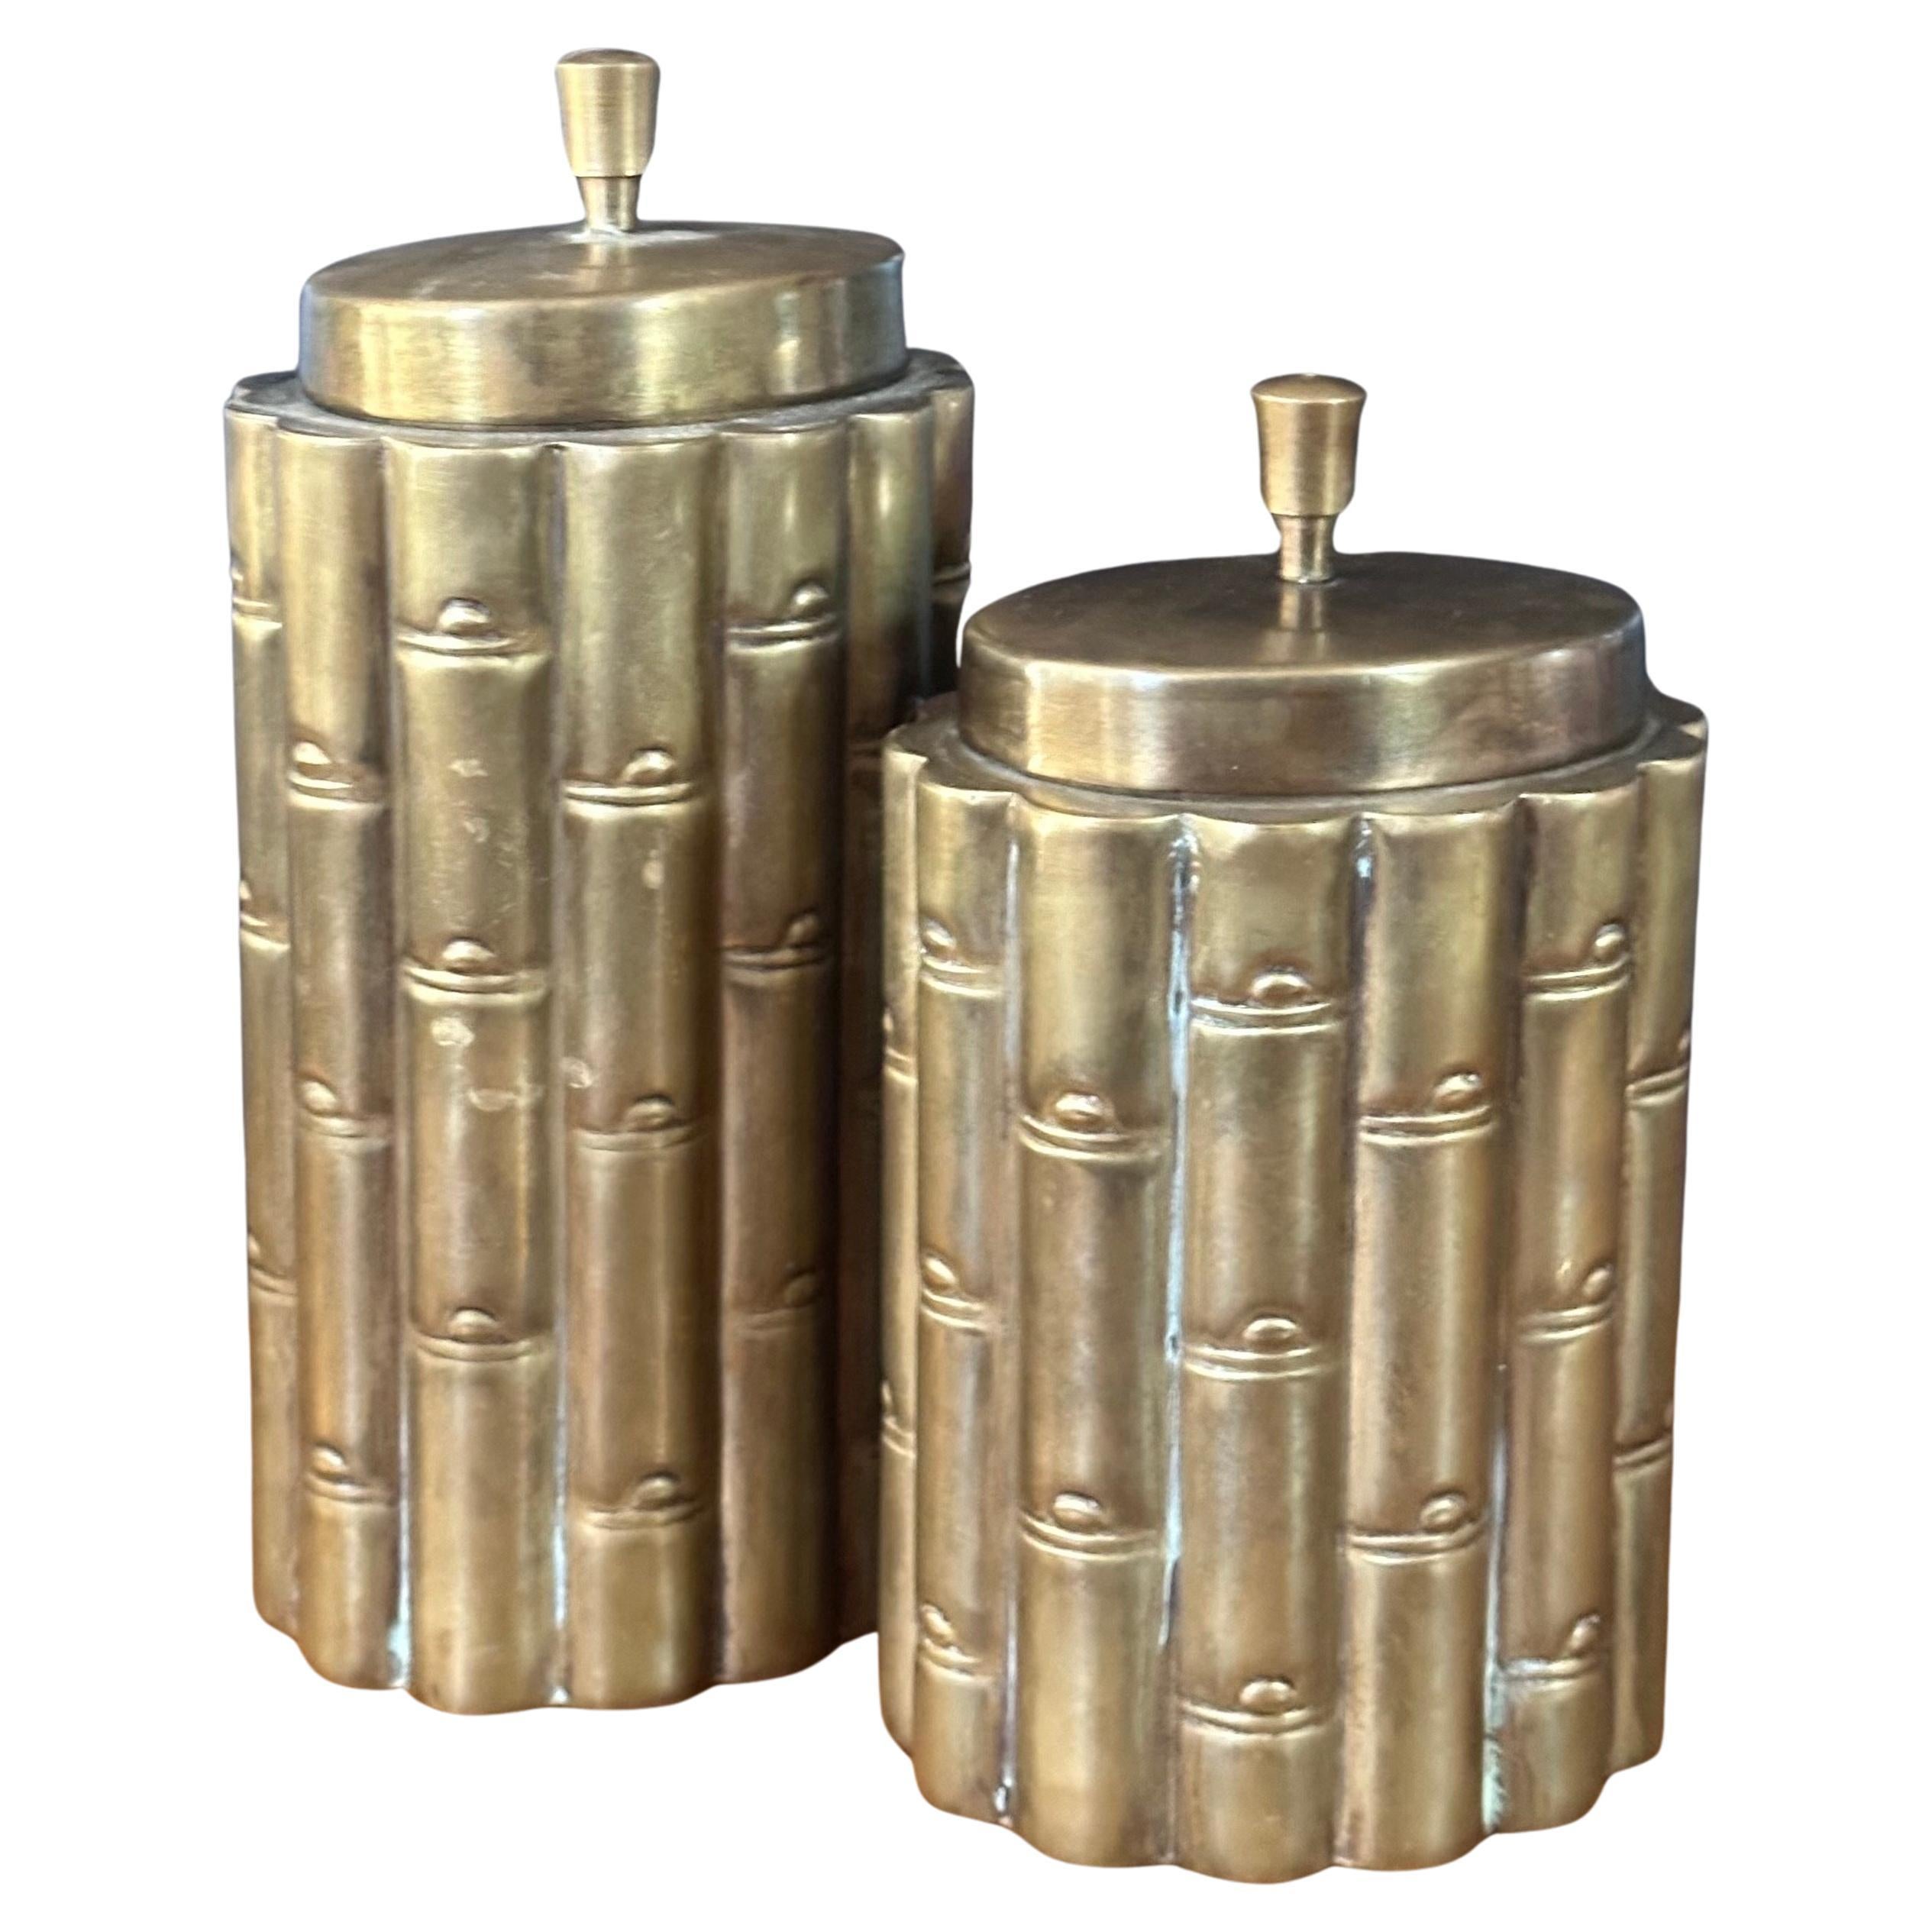 A beautiful pair of brass Hollywood regency faux bamboo cannisters, circa 1970s.  The cannisters are in very good vintage condition with a great patina and measure 4.5